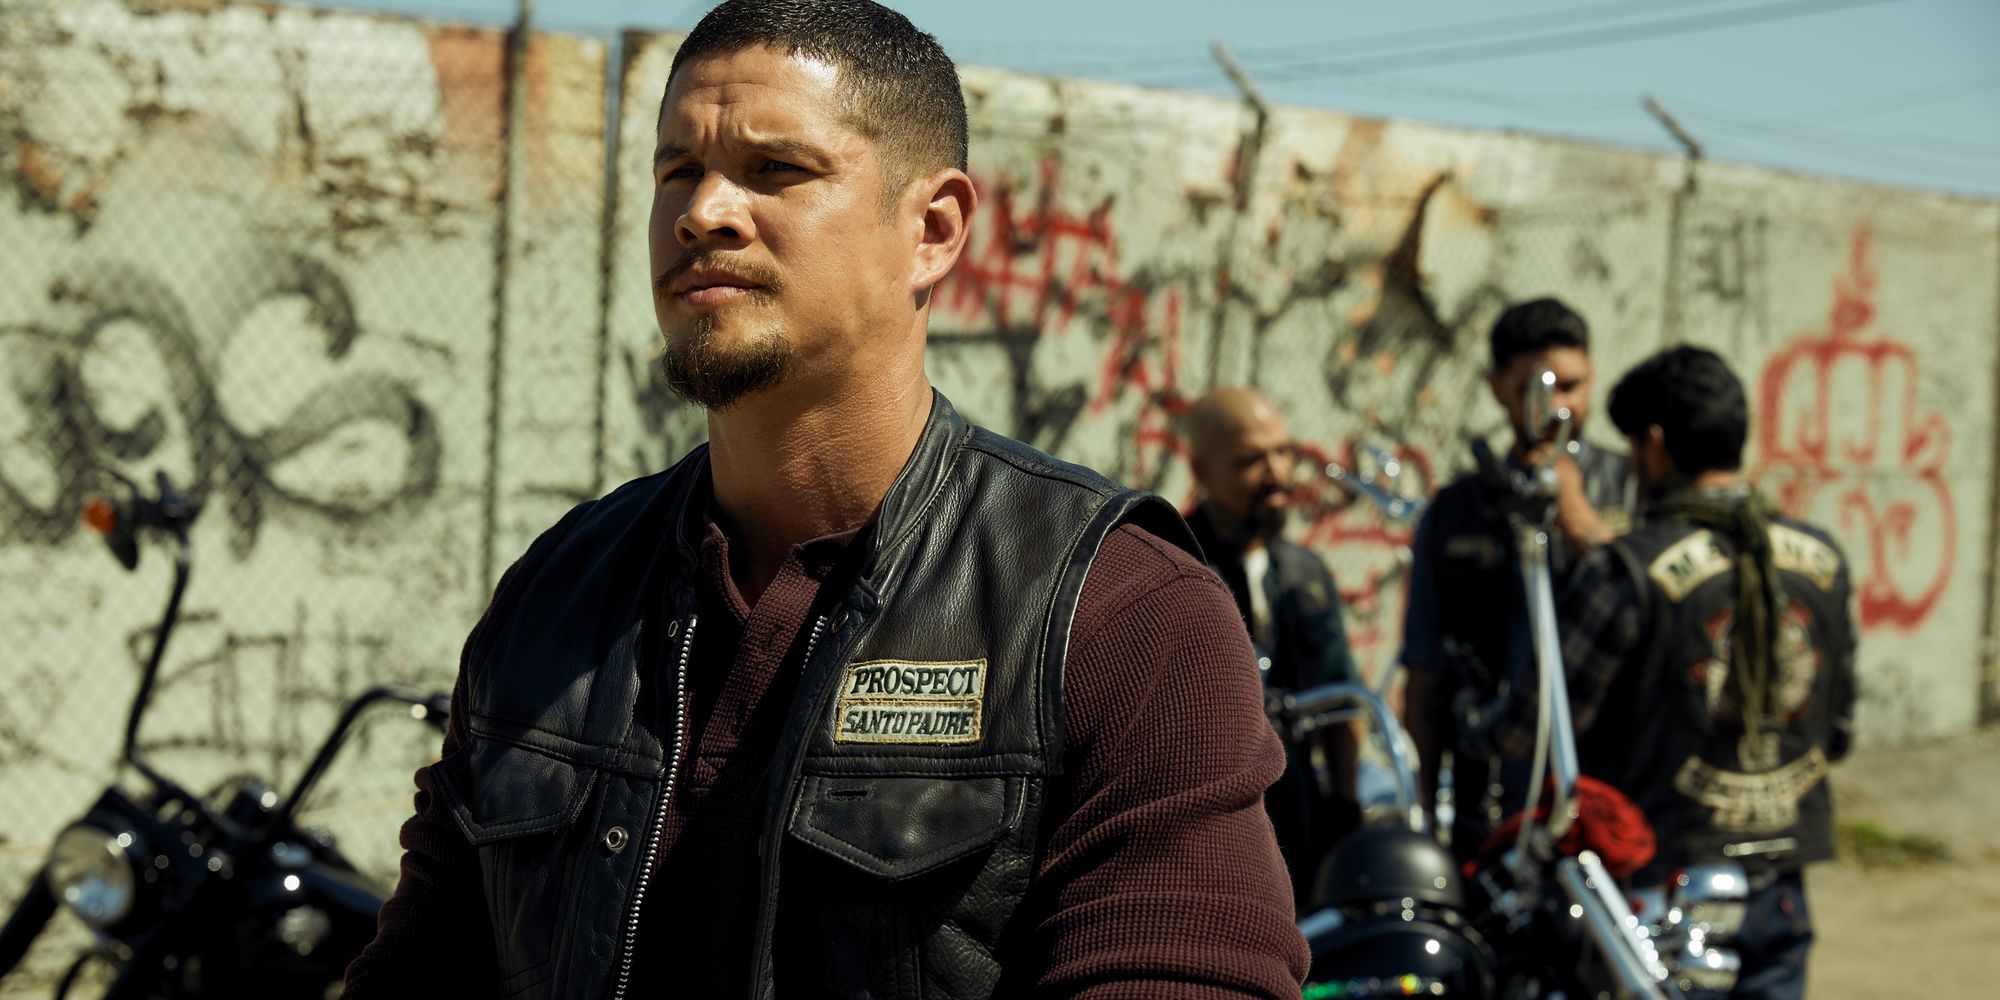 The Sons of Anarchy Connections In Mayans MC Season 1